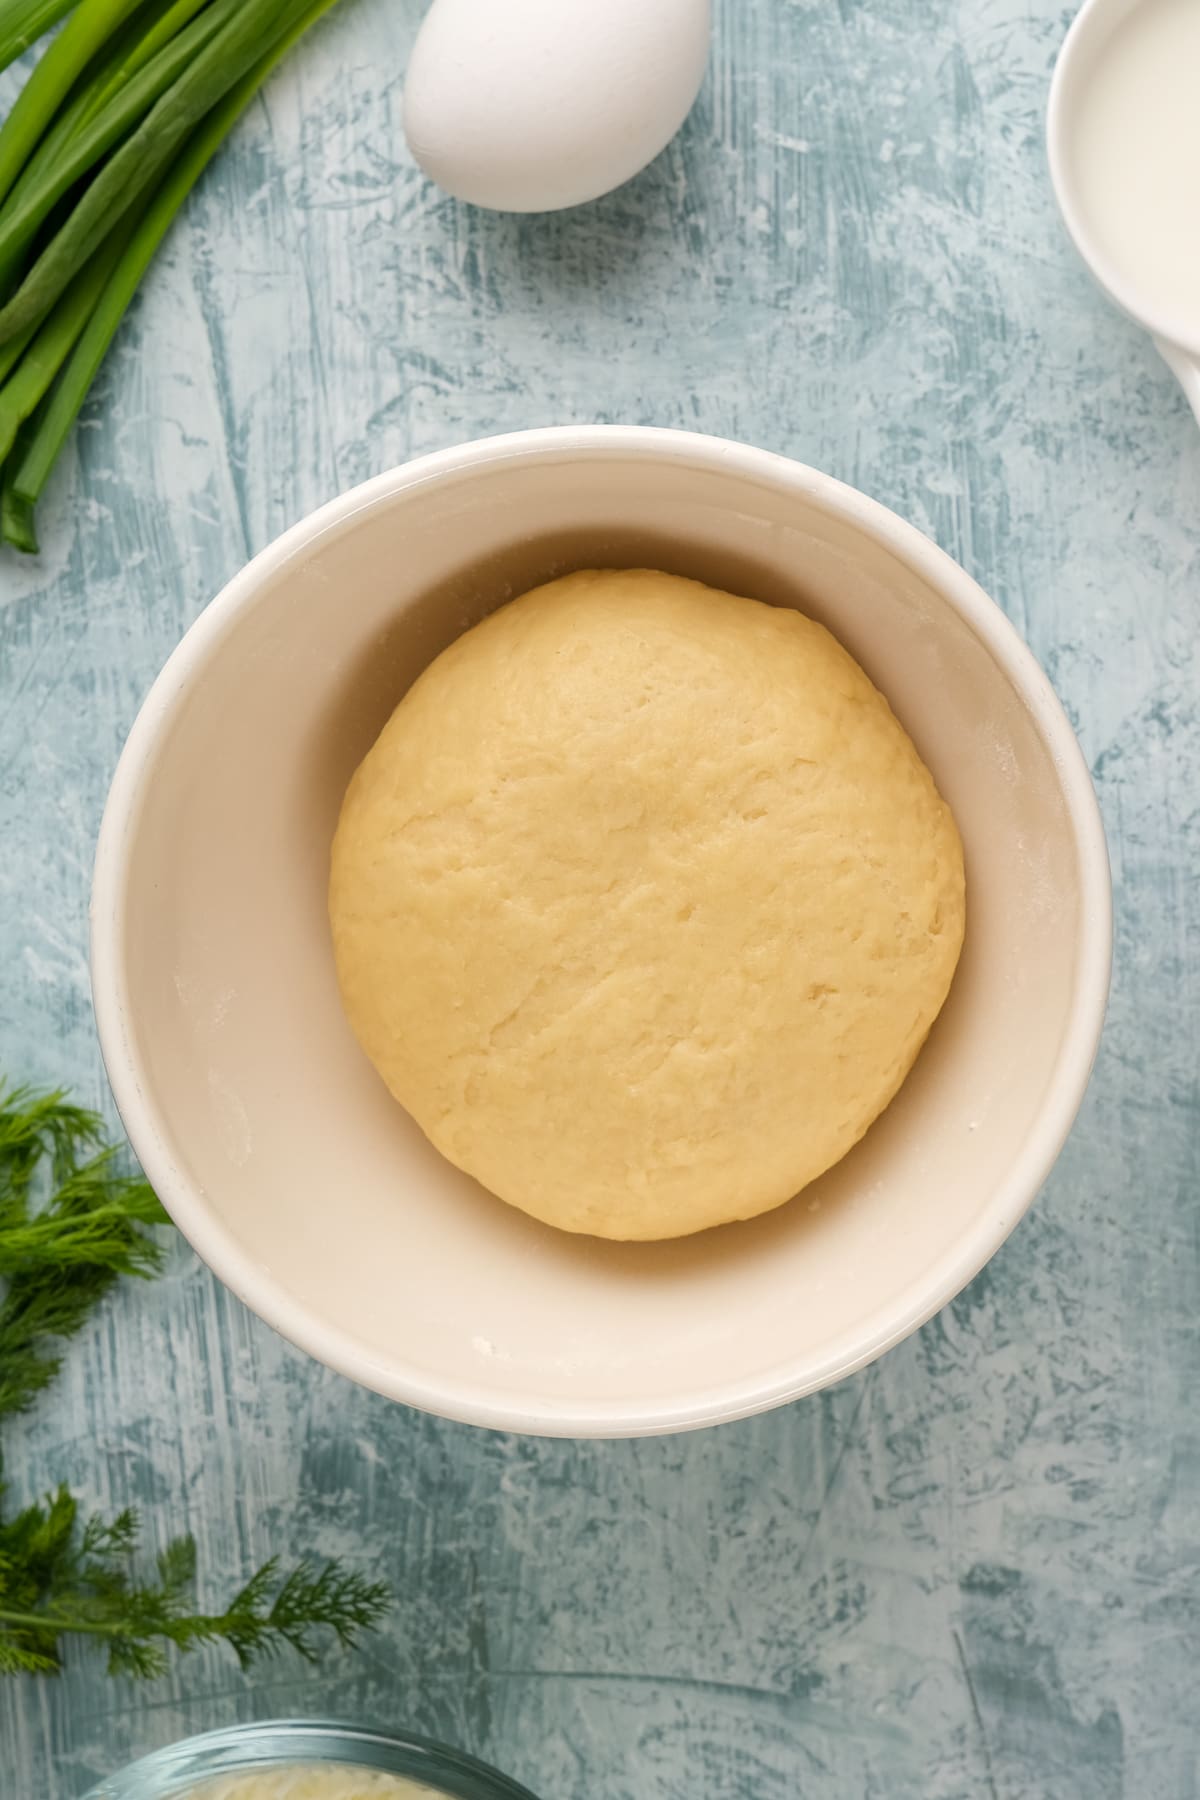 Crust dough ready in a white bowl, an egg, green onions and herbs on the side on a light background